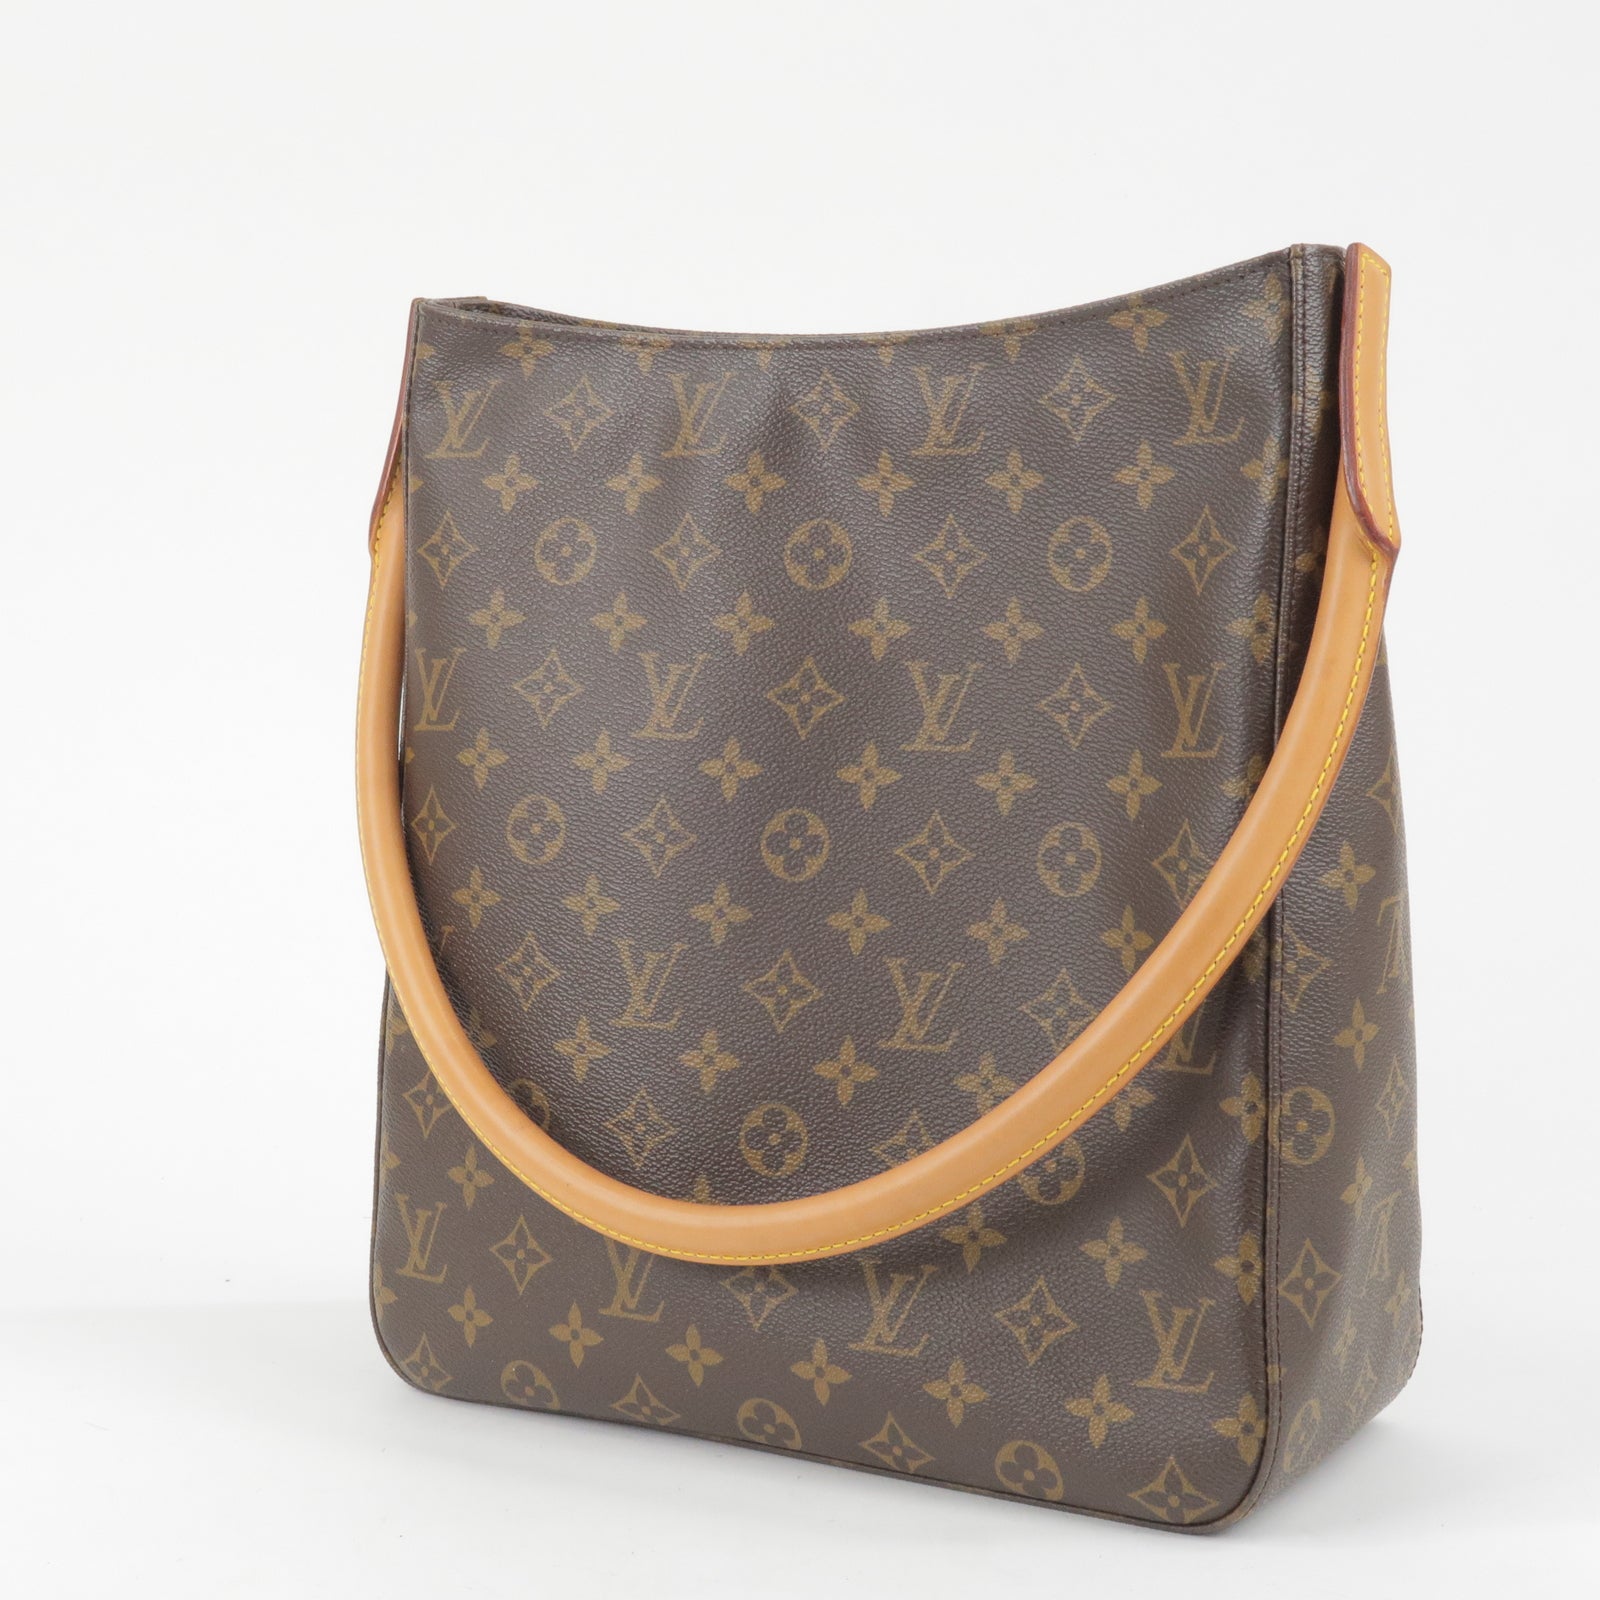 Louis Vuitton monogram GM cosmetic pouch converted to crossbody in 2023